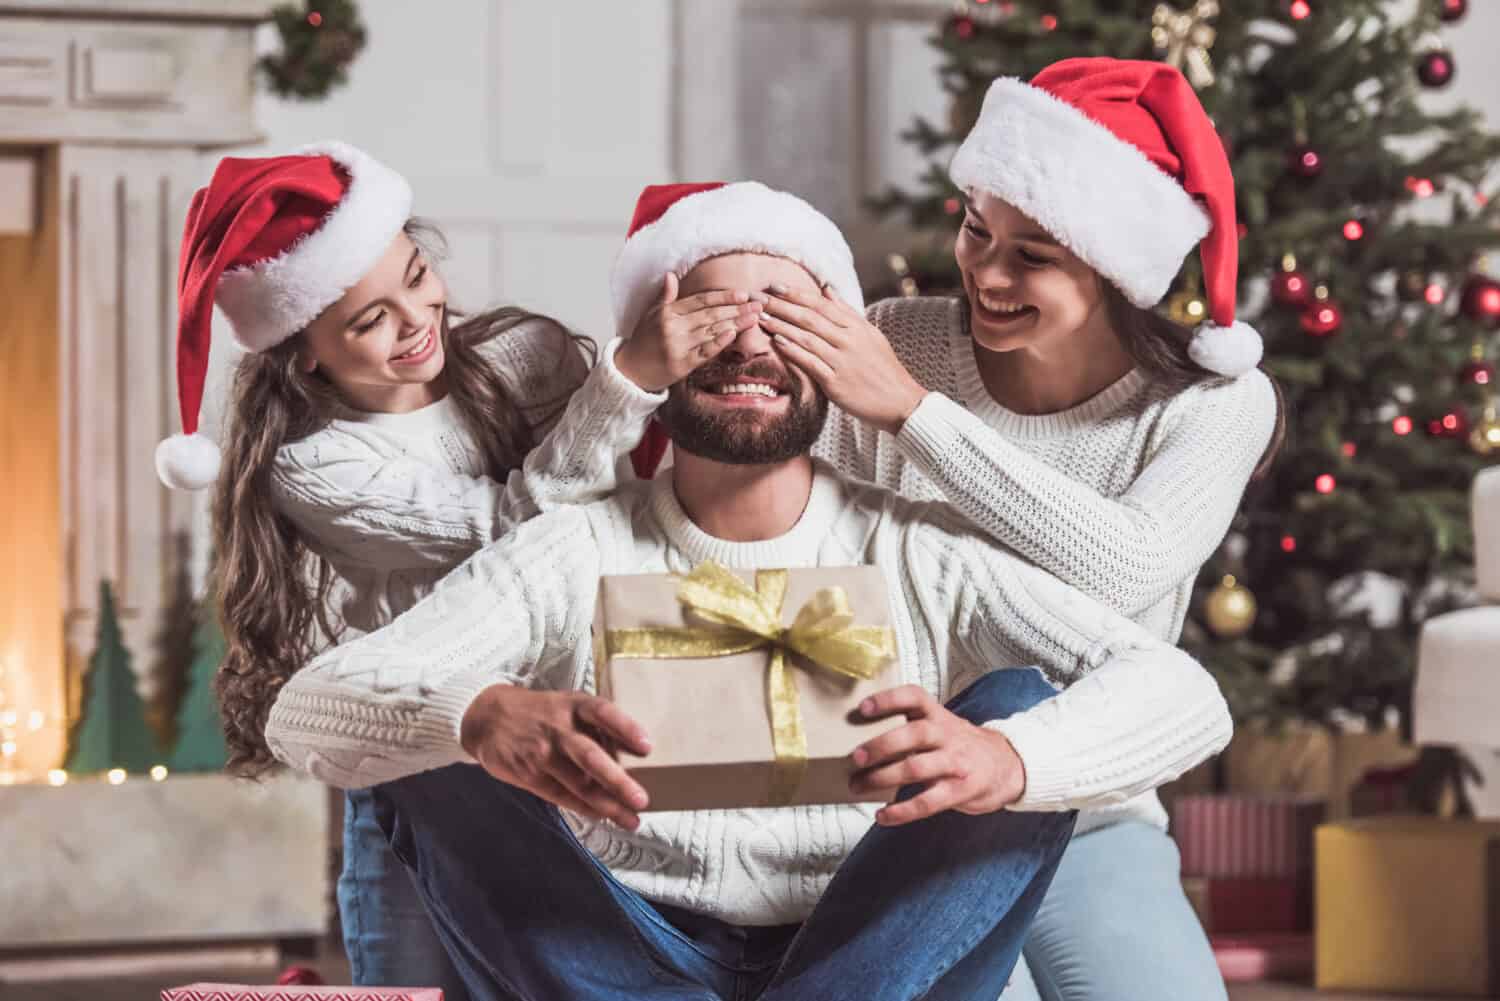 Merry Christmas and Happy New Year! Handsome man is holding a present and smiling while his daughter and wife covering his eyes